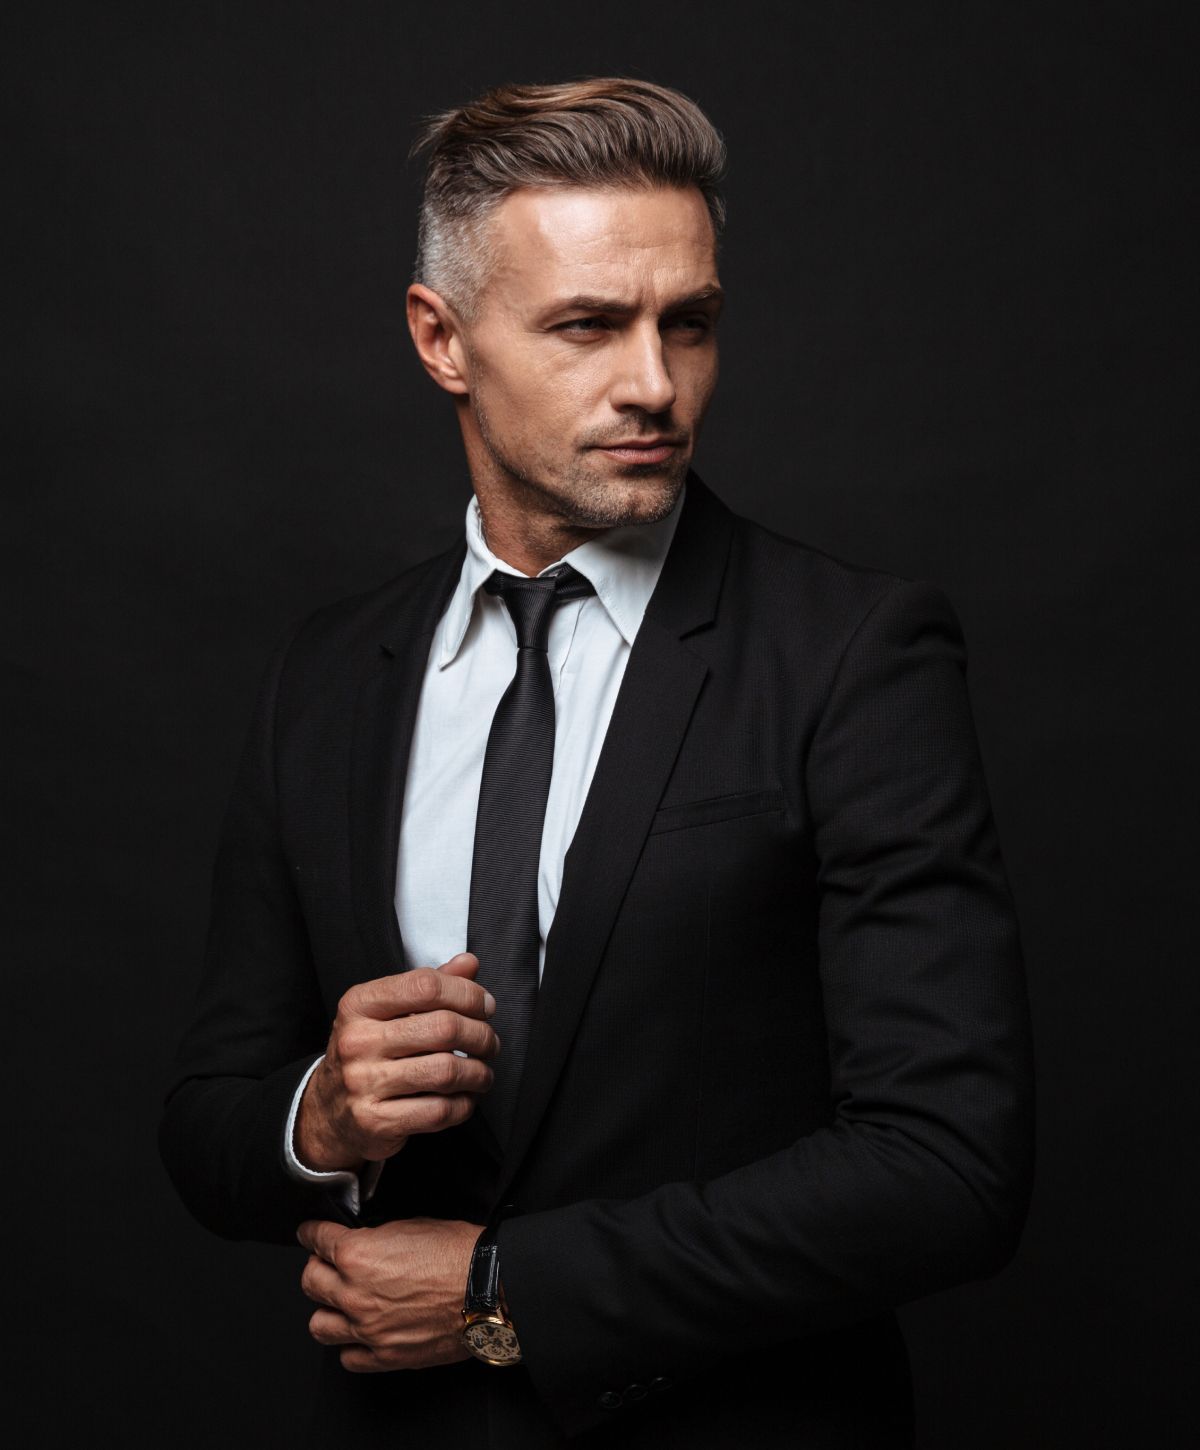 Testosterone Replacement Therapy model wearing a suit and tie